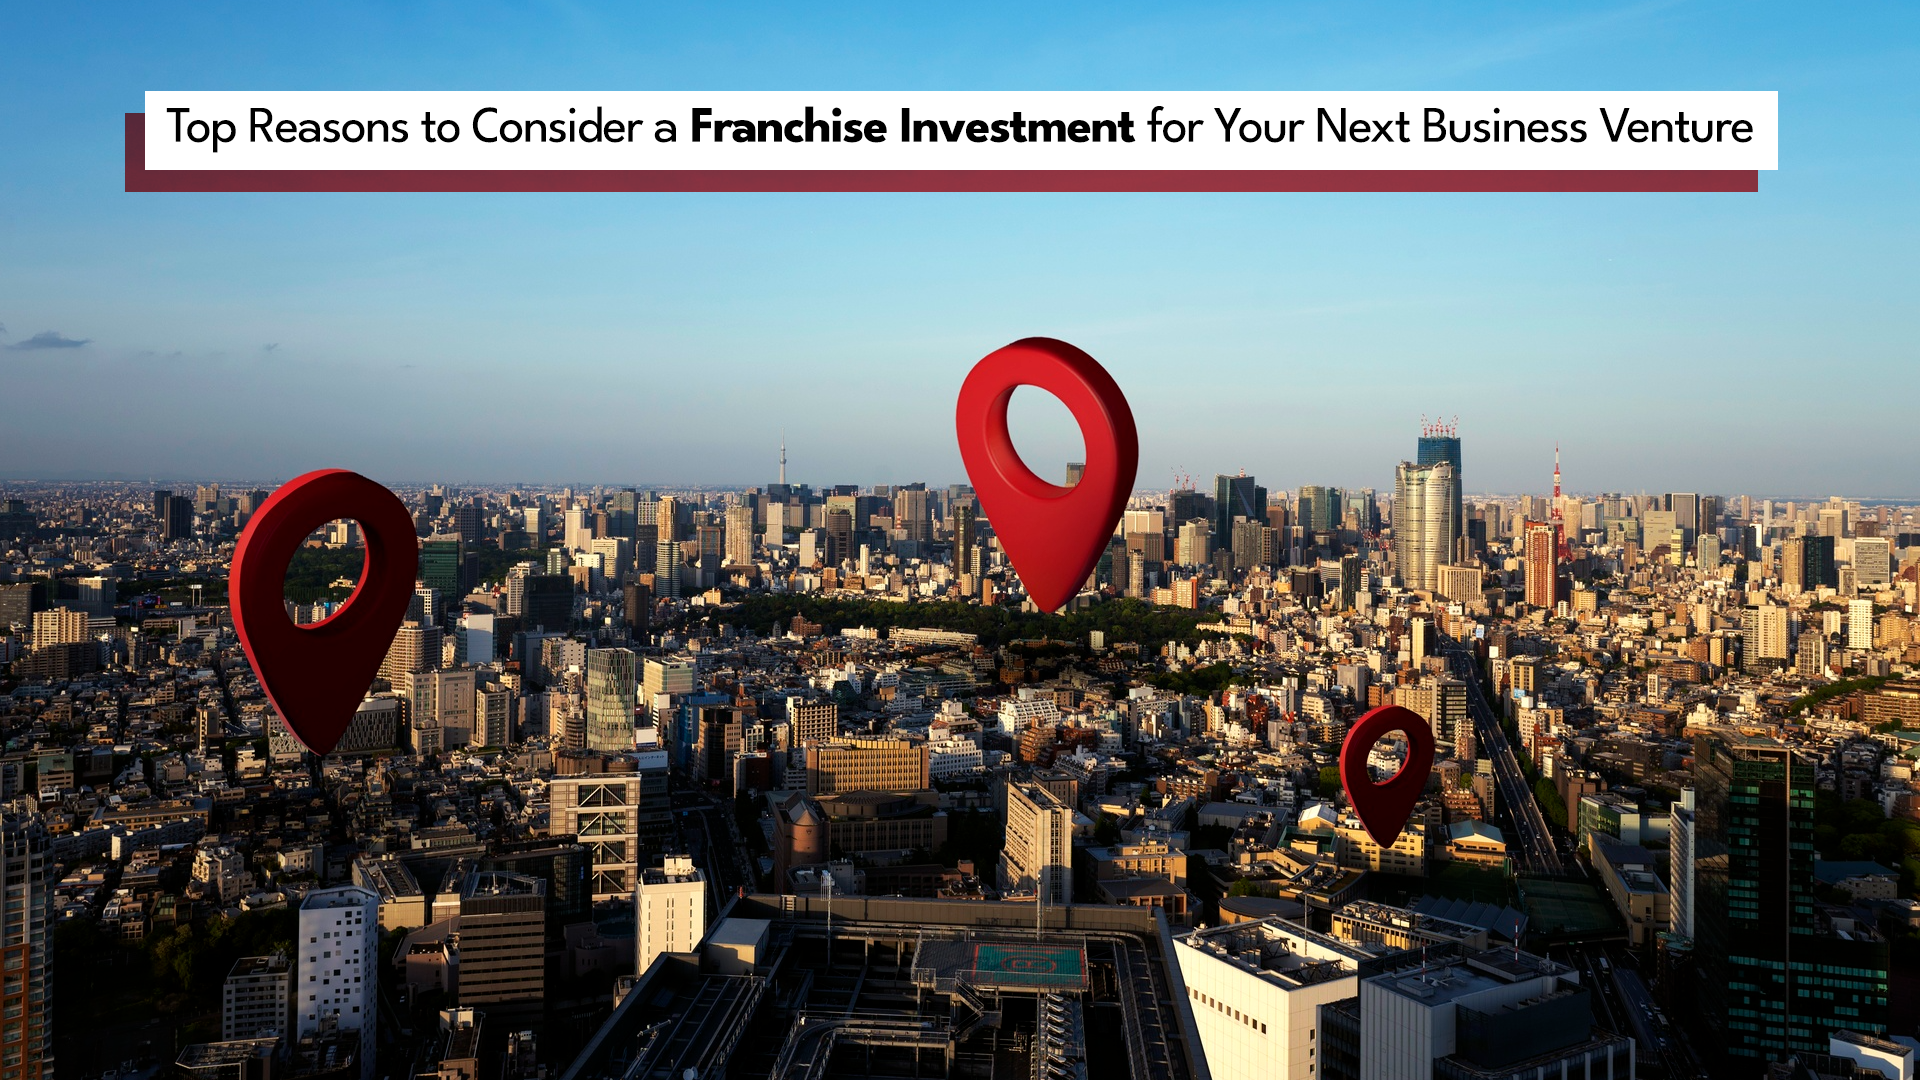 Top Reasons to Consider a Franchise Investment for Your Next Business Venture